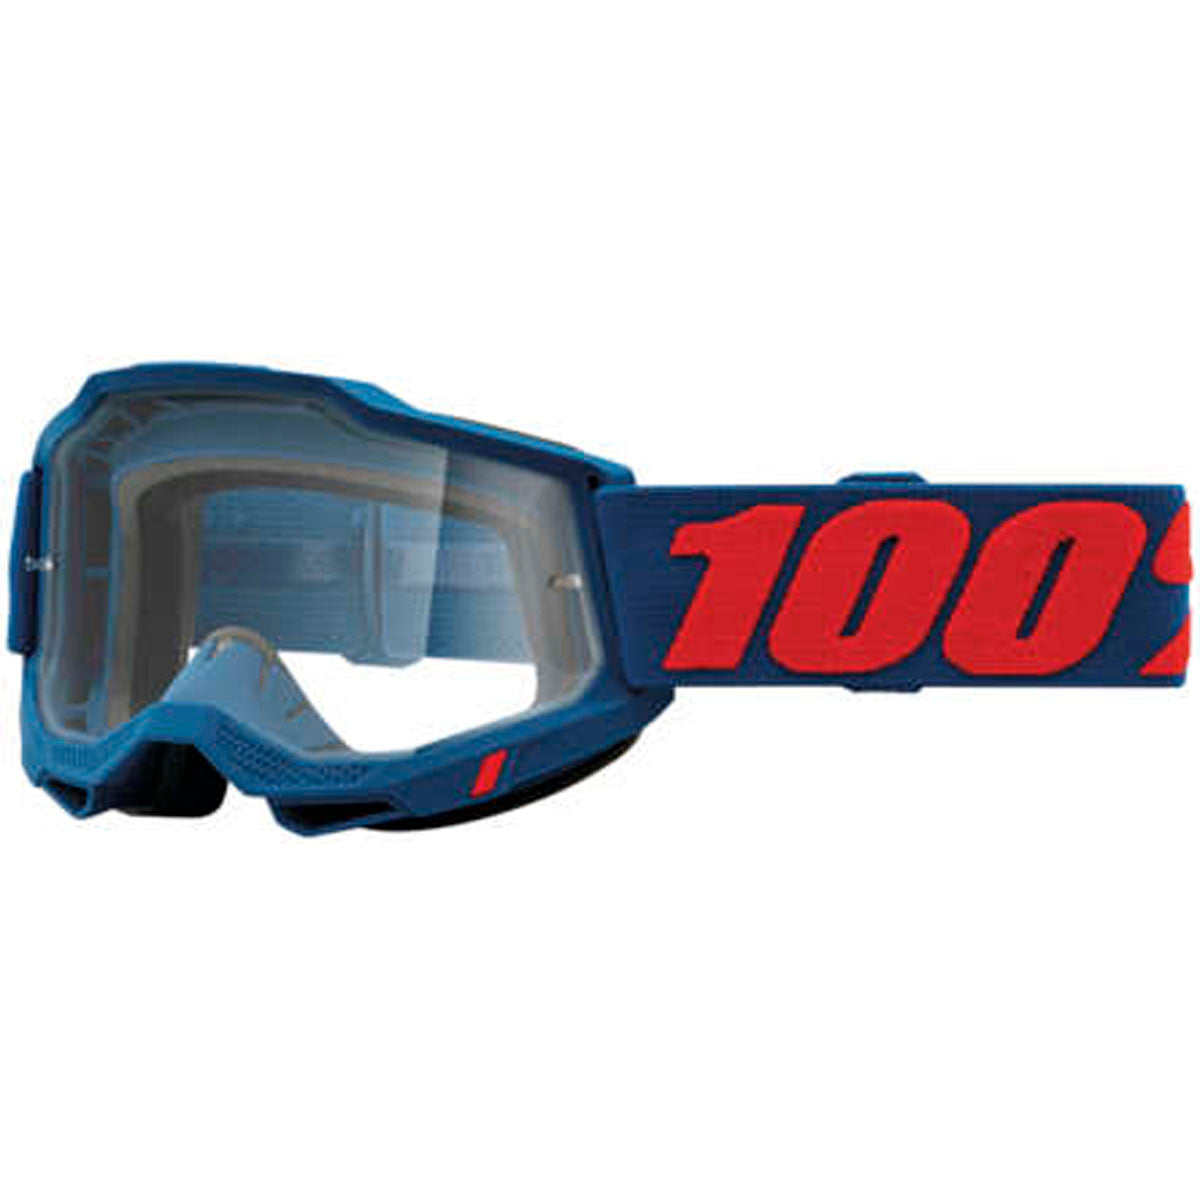 100% Accuri 2 Goggles Odeon / Clear Lens